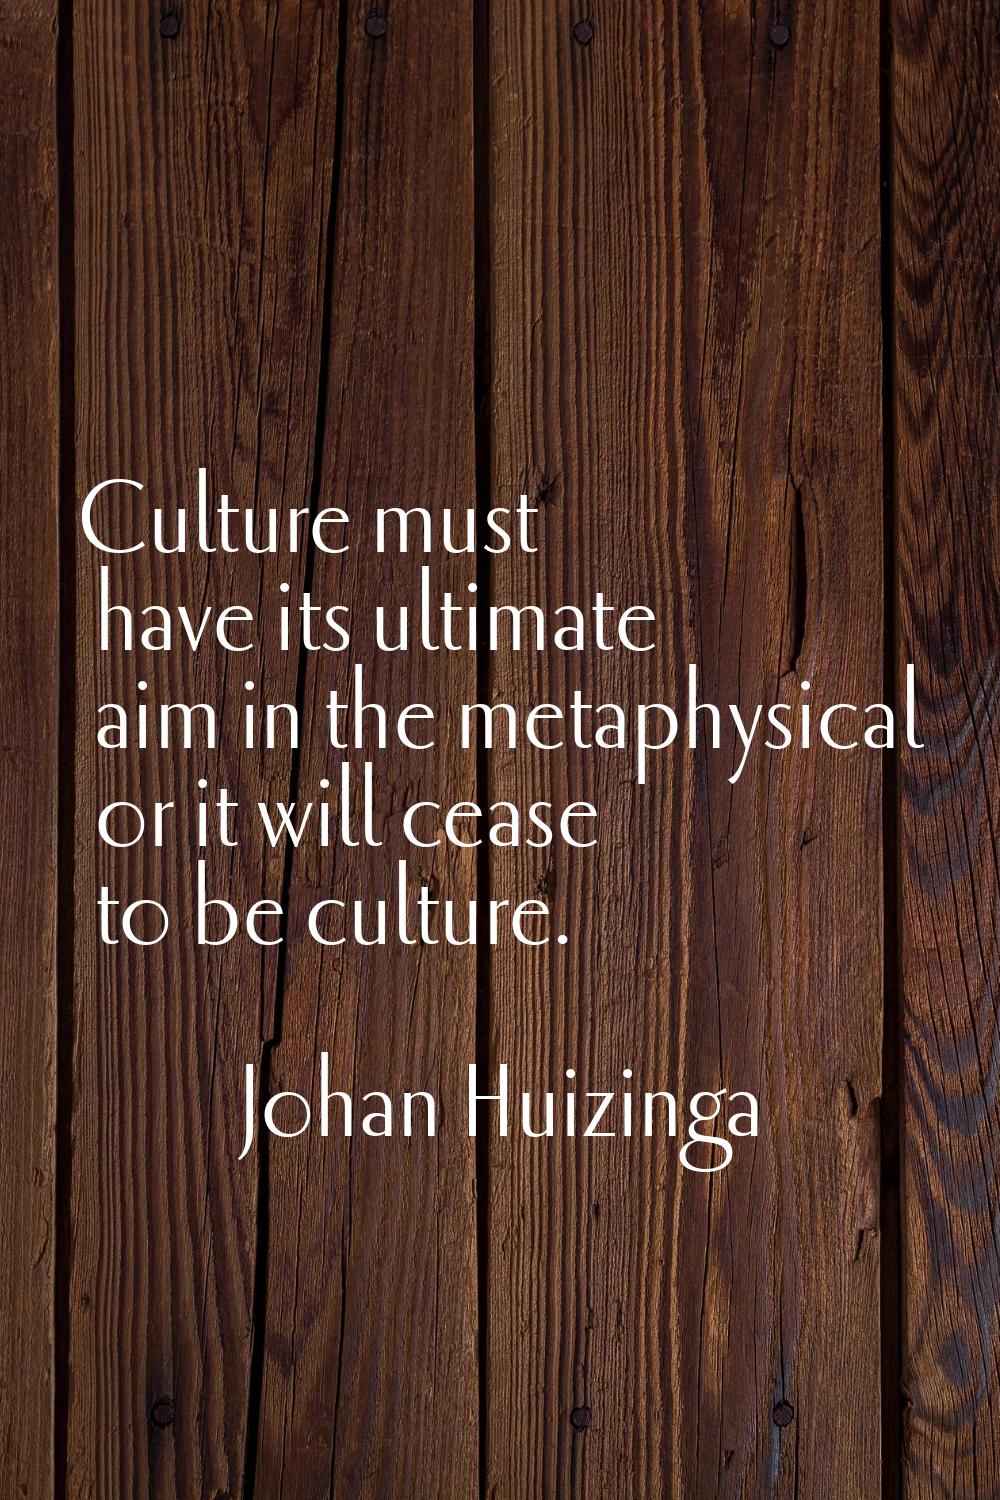 Culture must have its ultimate aim in the metaphysical or it will cease to be culture.